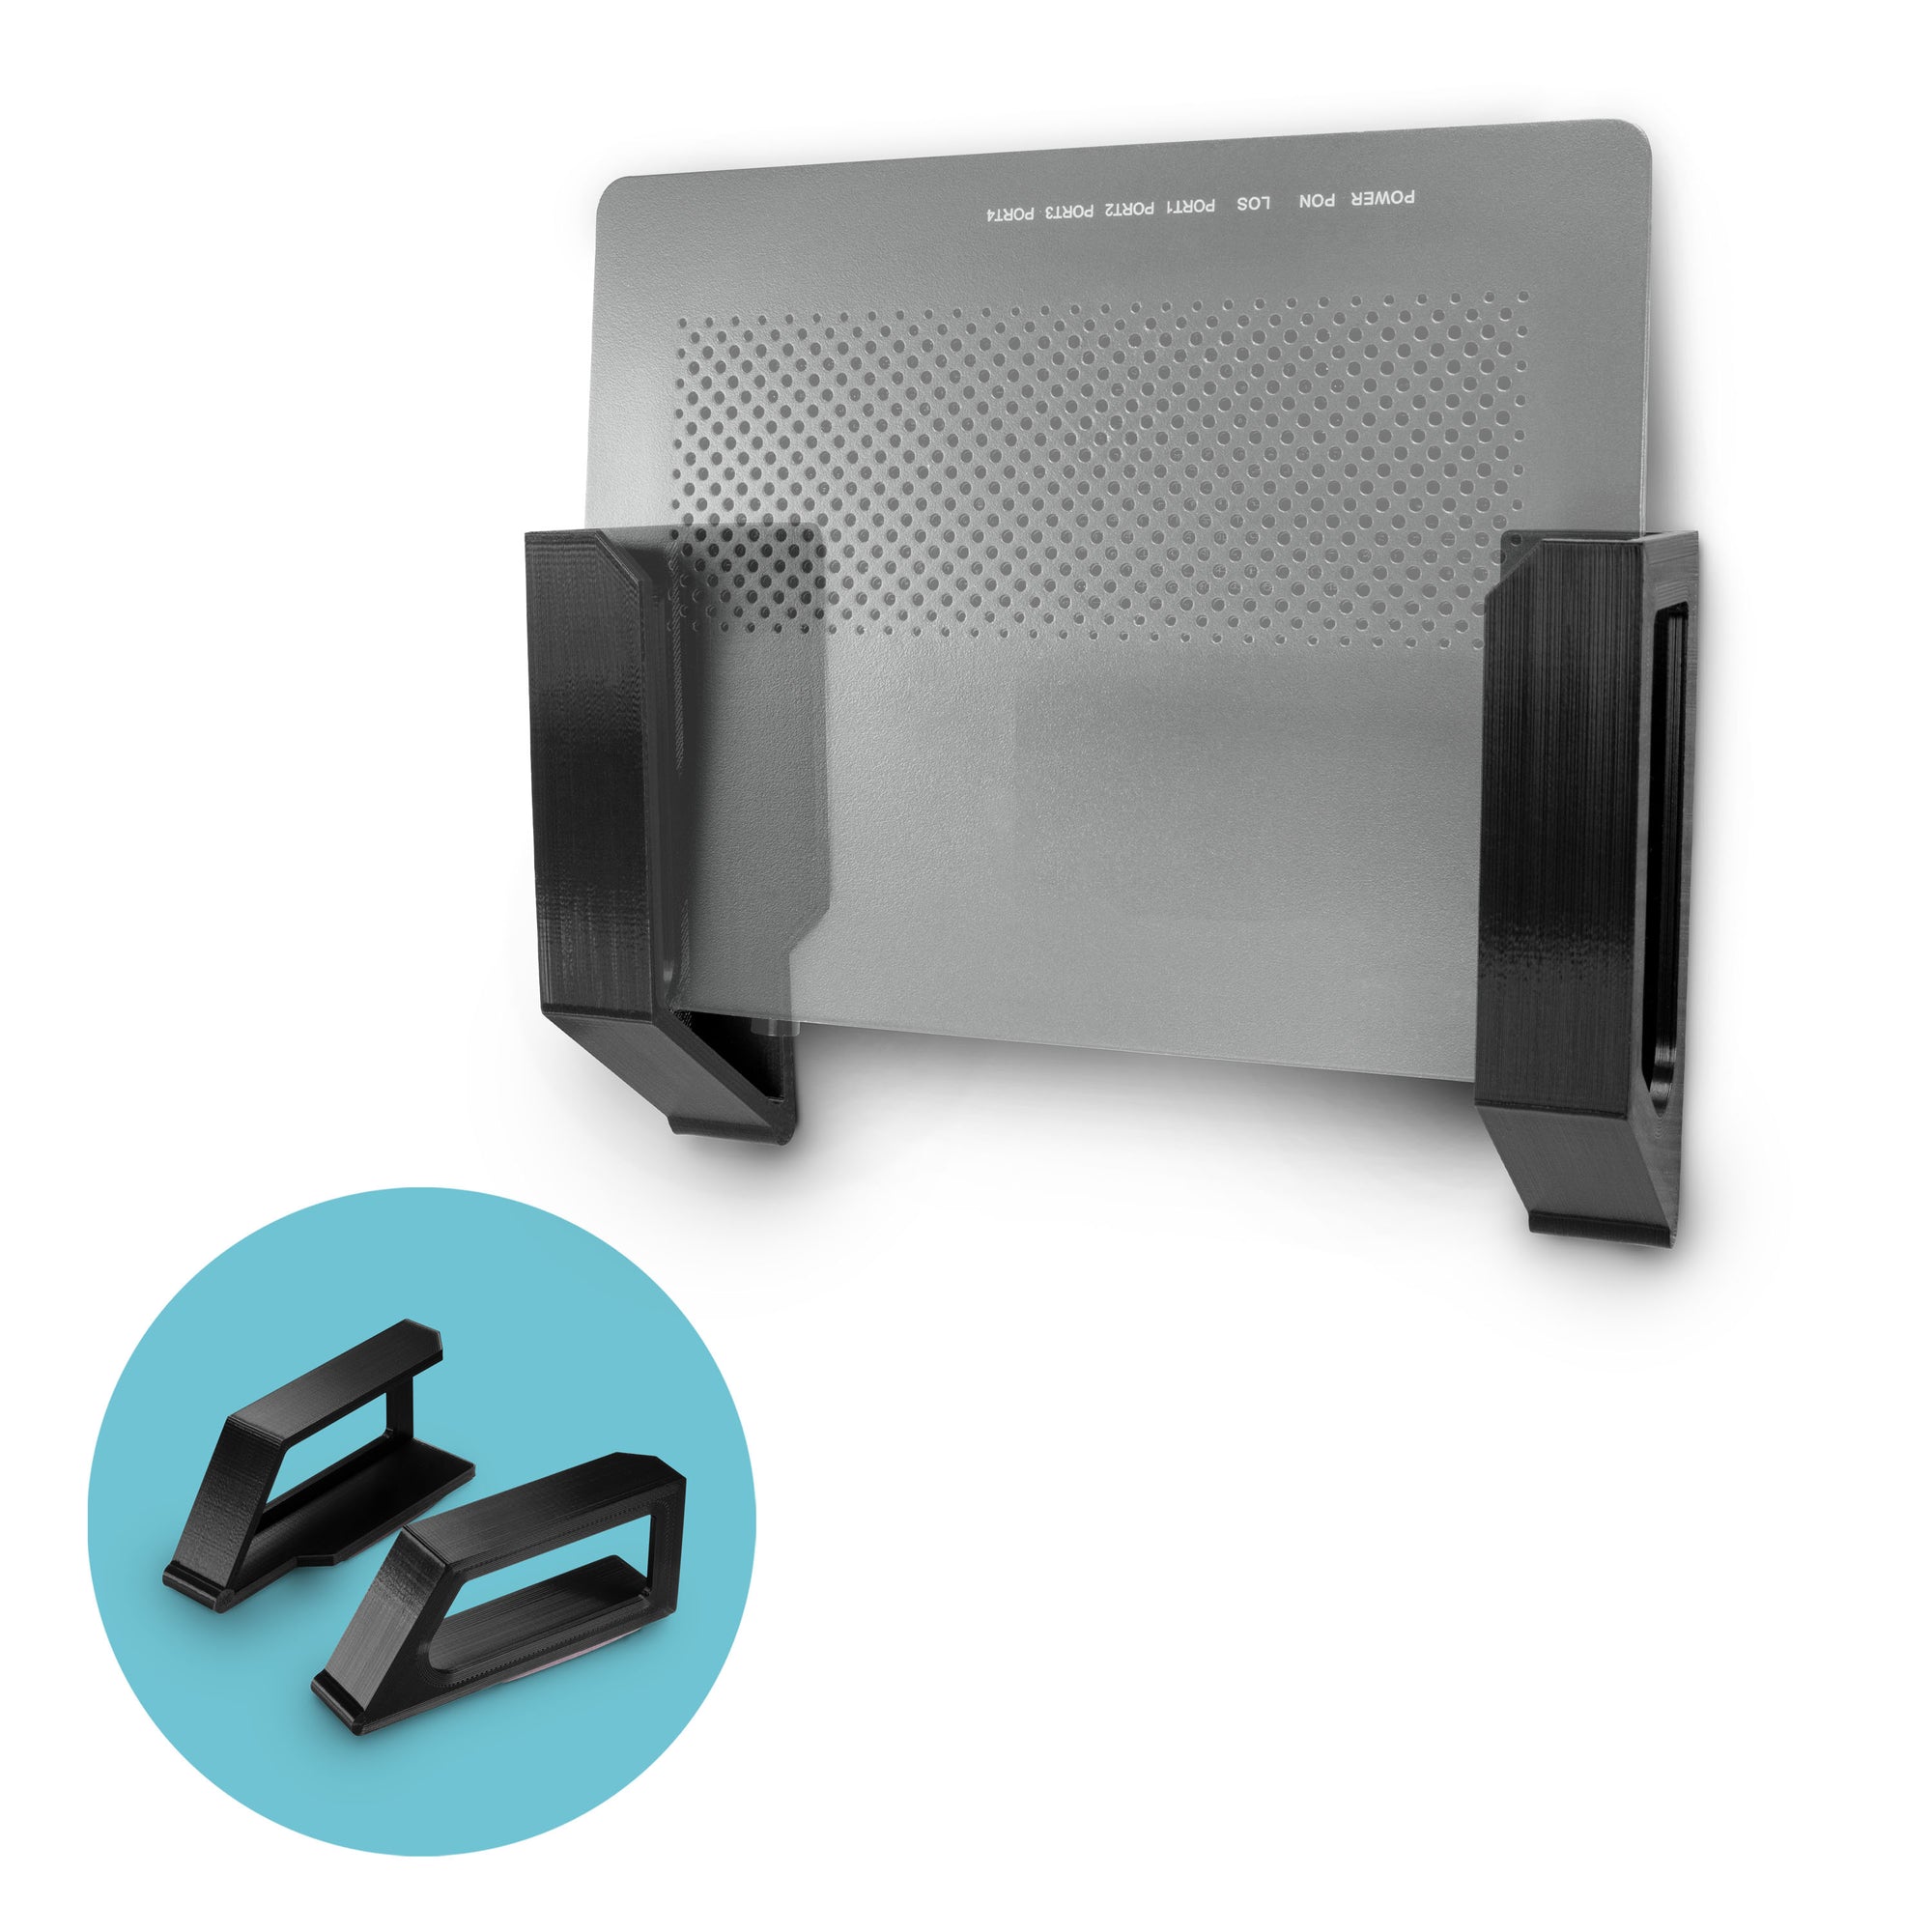 Screwless Wall mount for Routers, Cable Boxes and more - Devices up-to 1.5"/ 38mm Thick